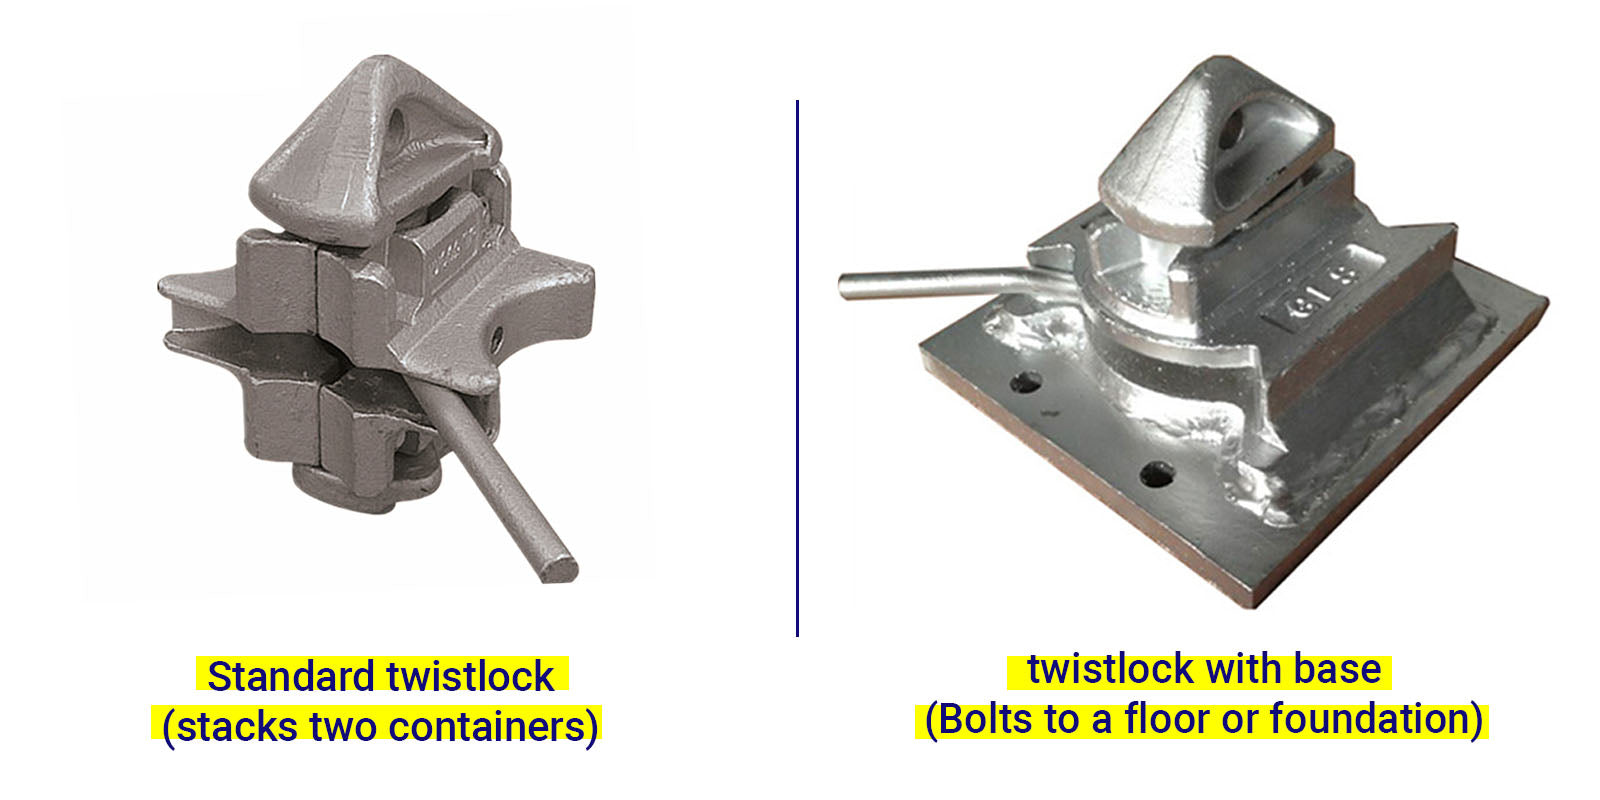 Comparing a standard twistlock and a twistlock with base